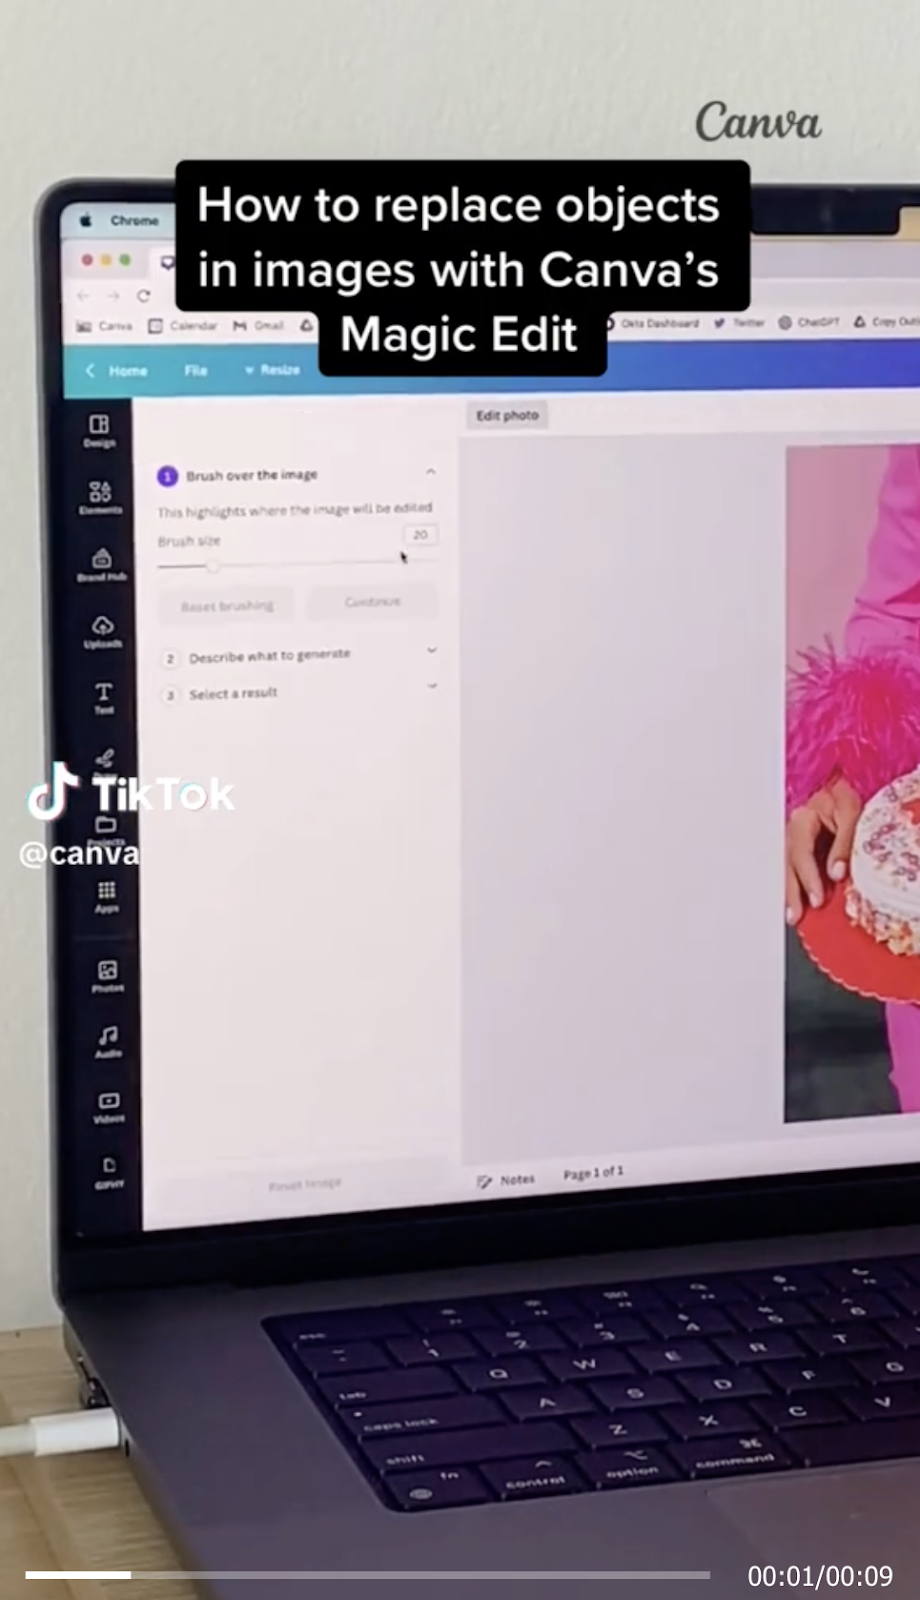 Canva’s TikTok video with on-screen caption: "How to replace objects in images with Magic Edit”